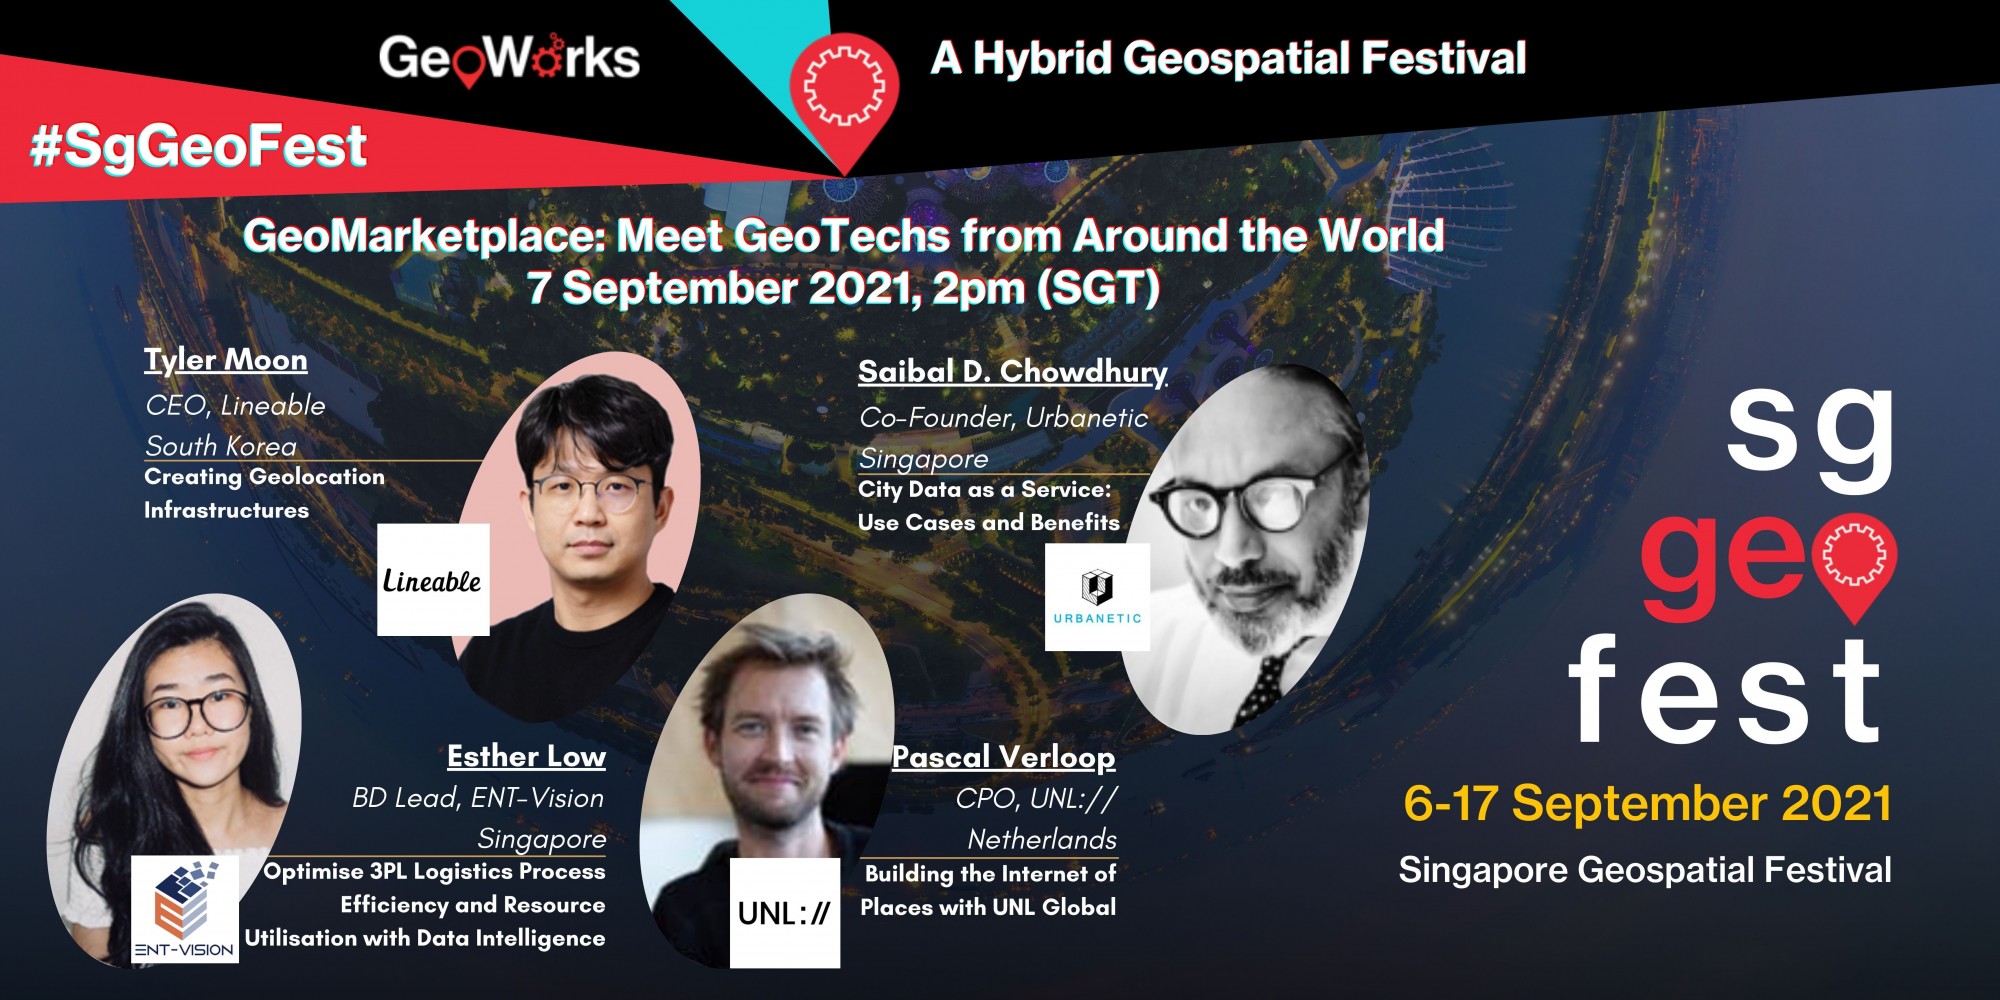 GeoMarketplace: Meet GeoTechs from Around the World